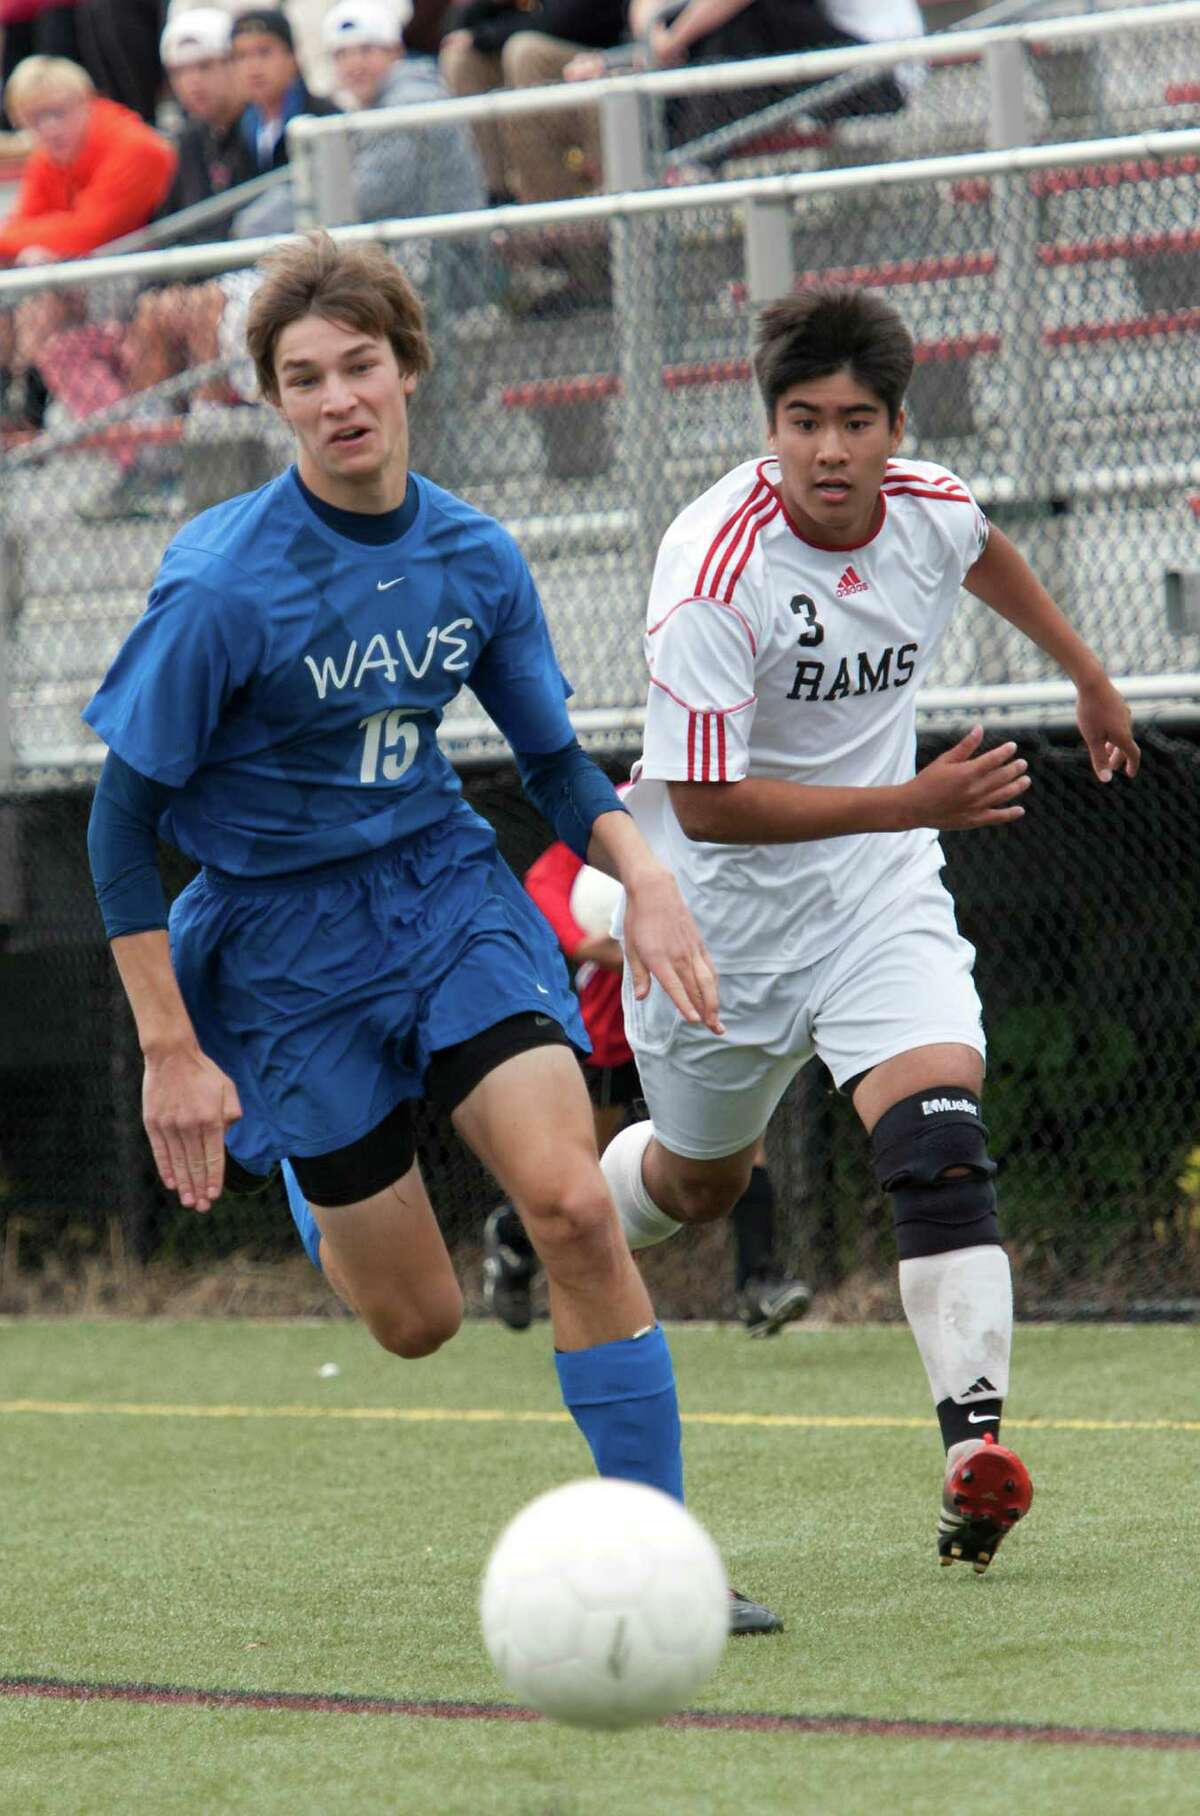 Darien high school's Nick Vilter and New Canaan high school's Justin Pertierra battle for the ball in a boys soccer game held at New Canaan high school, New Canaan, CT Monday October 8th, 2012.